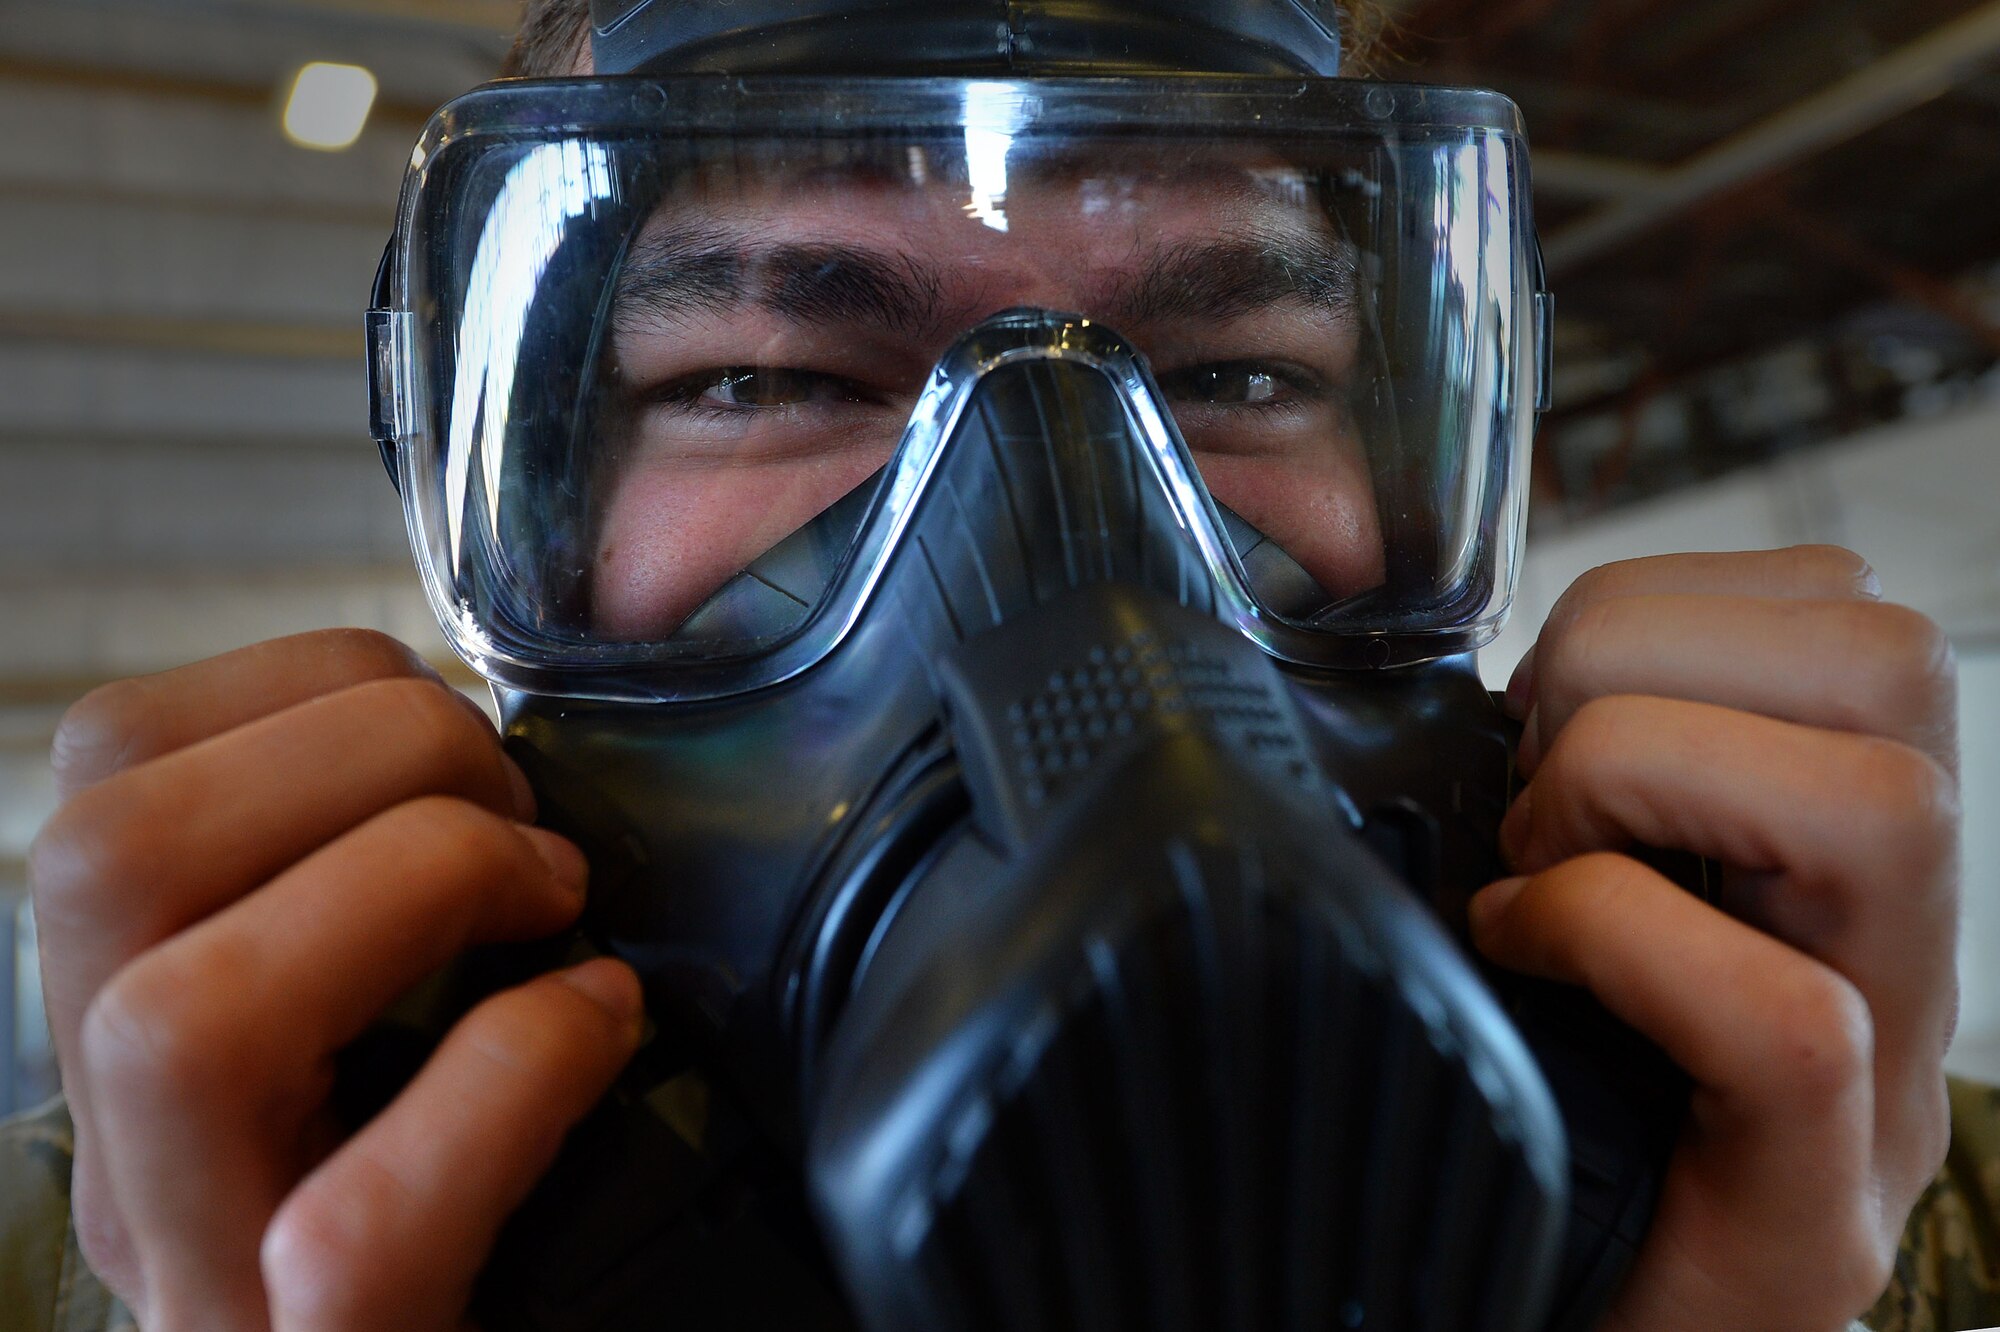 U.S. Air Force Airman 1st Class Kyle Denzine, 20th Operations Support Squadron aircrew flight equipment specialist, checks the seal of his gas mask at Shaw Air Force Base, S.C., Oct. 23, 2015. Denzine along with other AFE Airmen practiced the actions they would take in the event a pilot needs to be decontaminated upon his return to base. (U.S. Air Force photo by Senior Airman Michael Cossaboom)